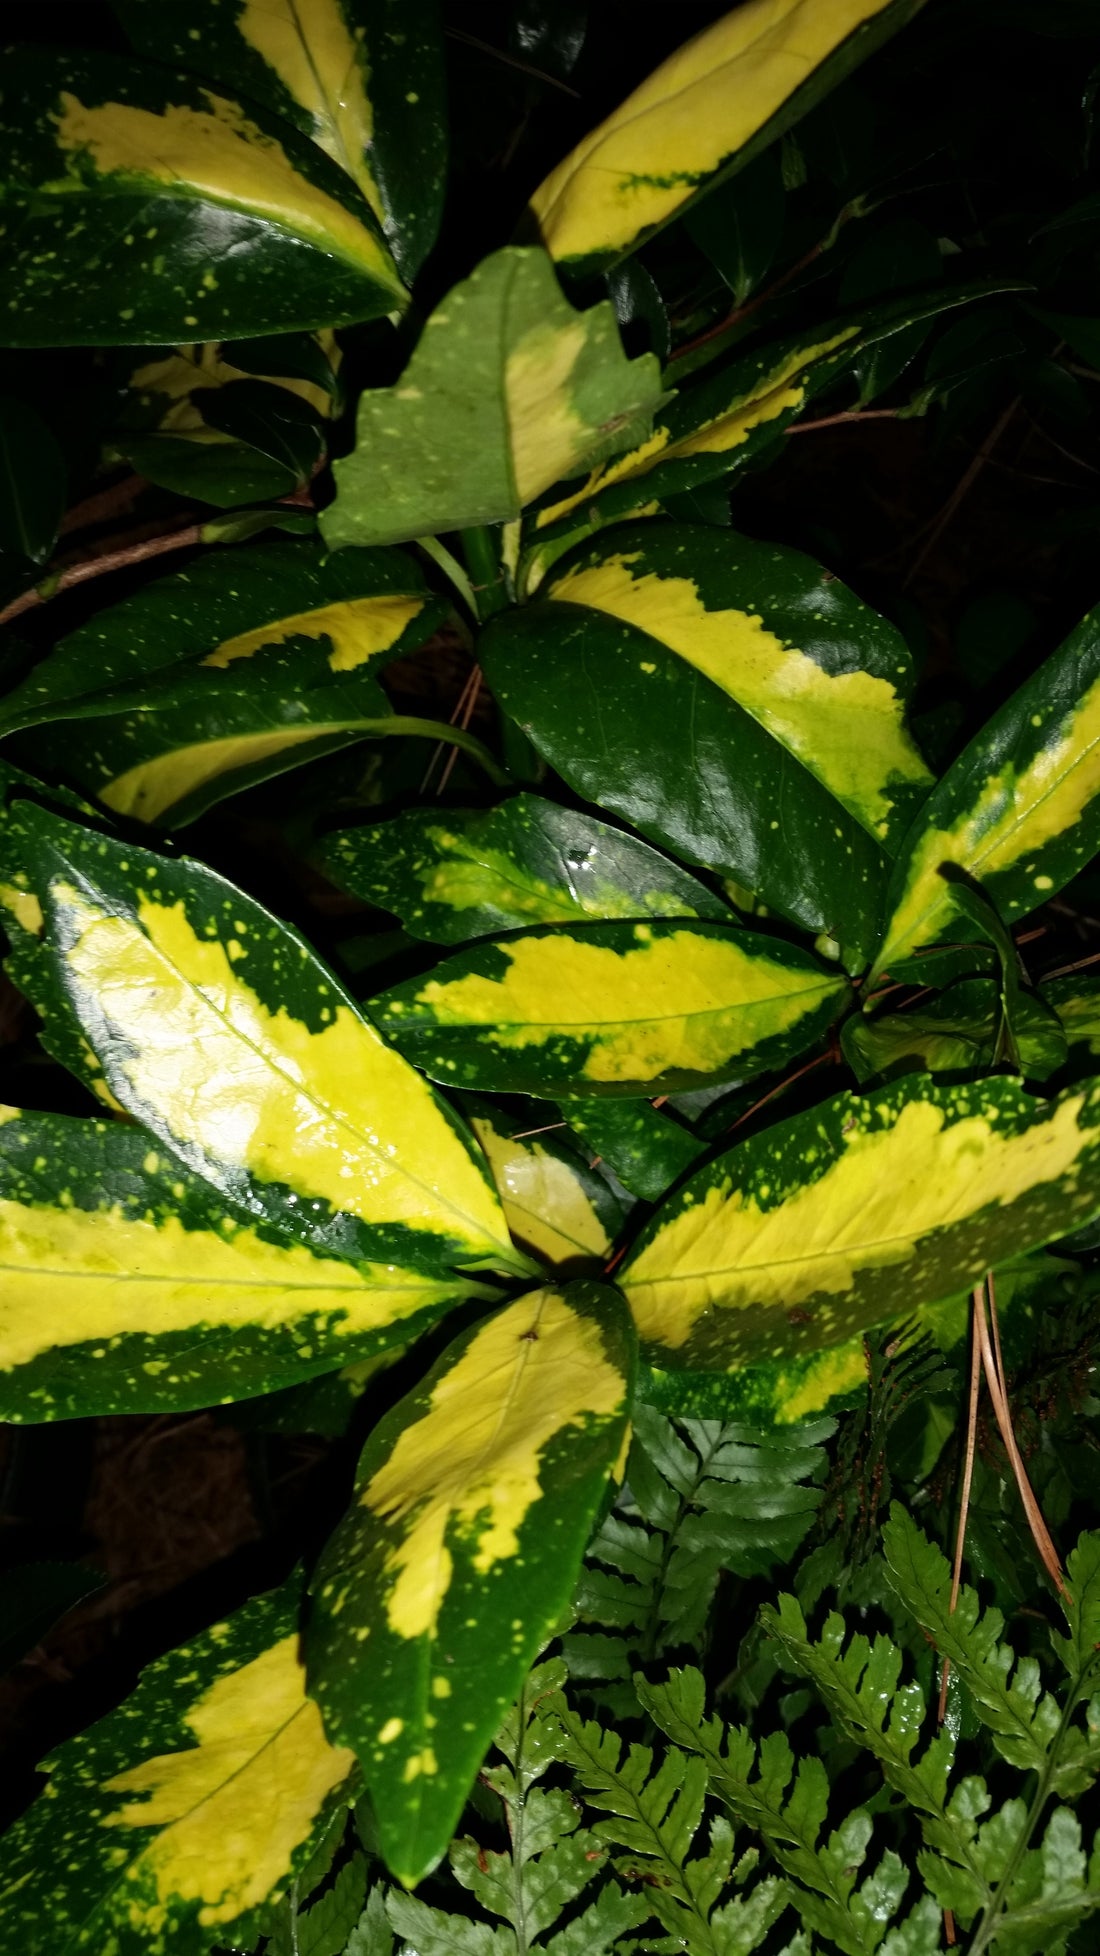 Acuba Picturata- Large Golden Splash In The Middle of Each Leaf, with Small Yellow Speckles Against The Green Background.